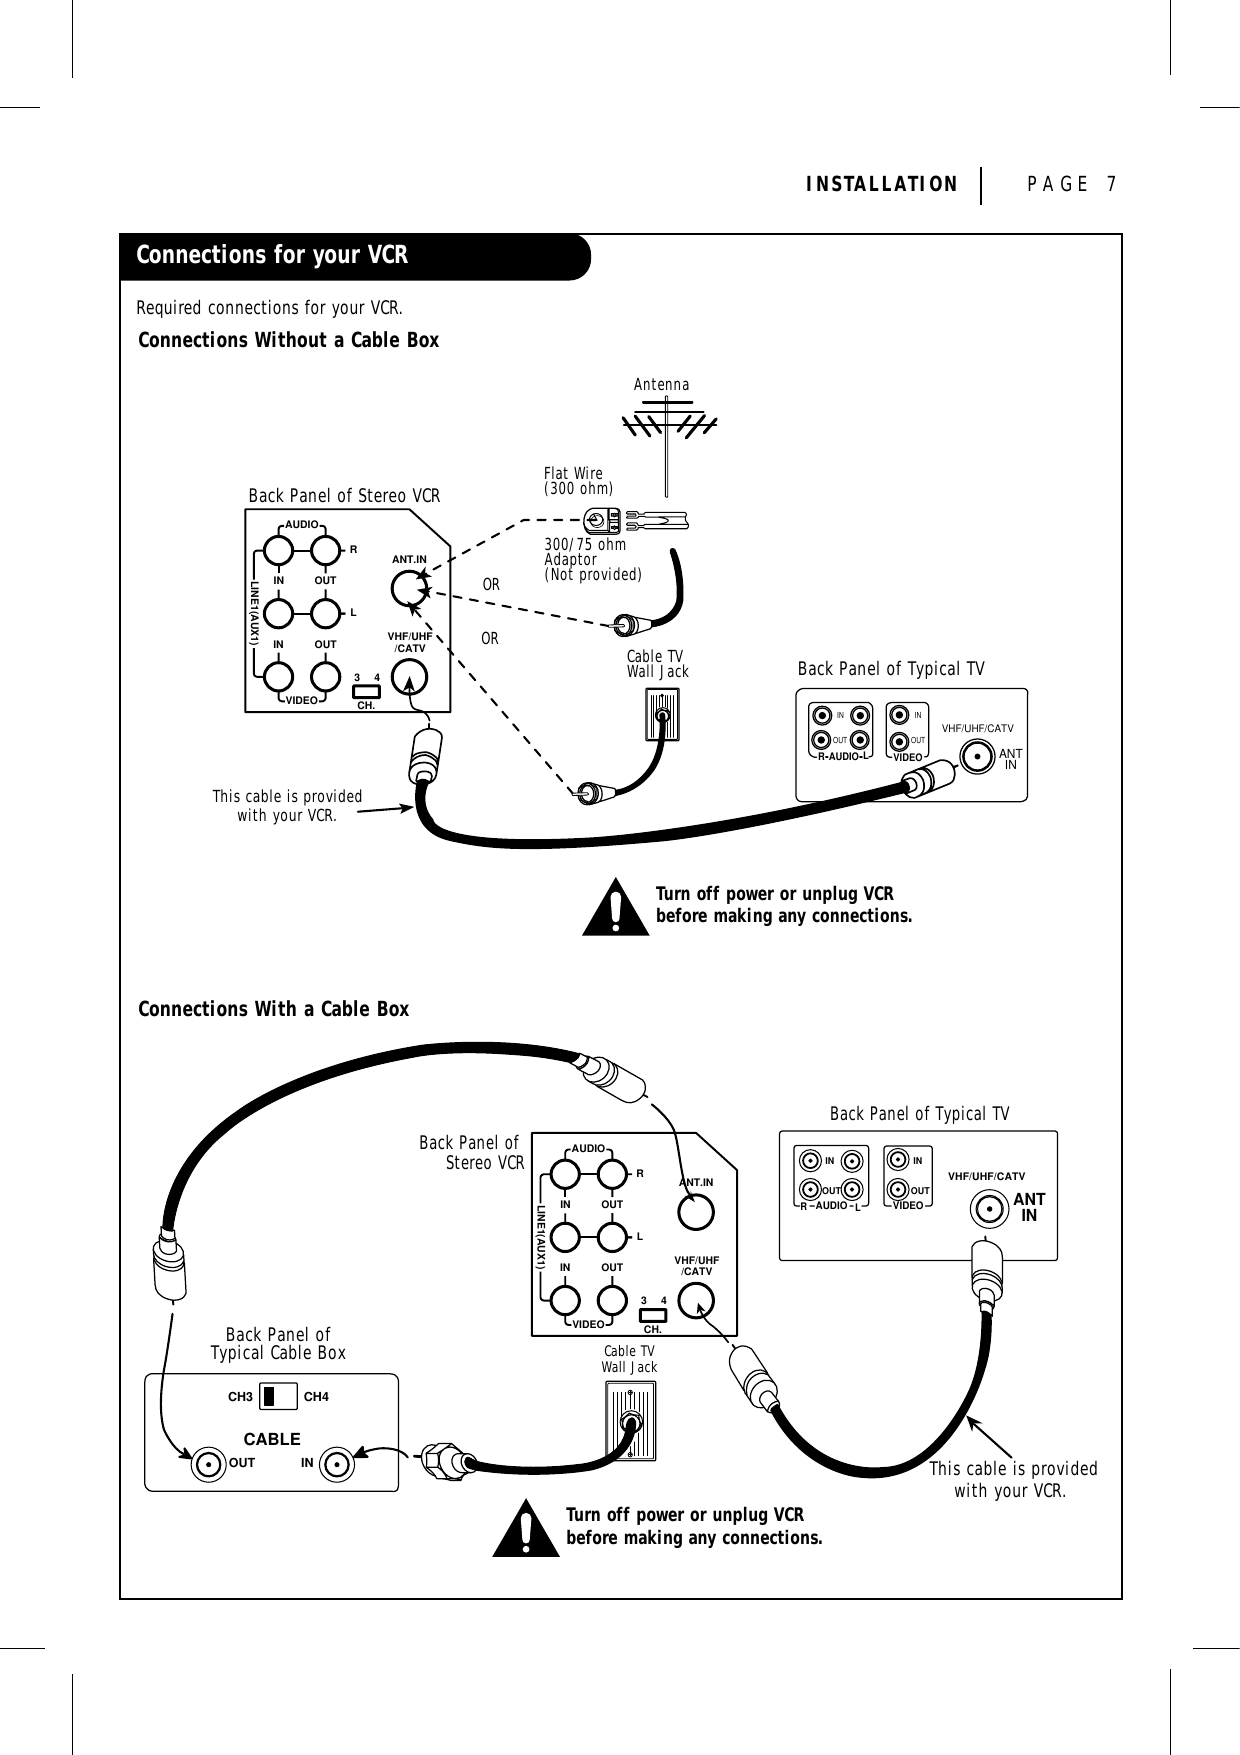 INSTALLATION PAGE 7Connections for your VCRRequired connections for your VCR.Connections With a Cable BoxConnections Without a Cable BoxAUDIOLINE1(AUX1)RLININ OUTOUTANT.INVIDEO CH.34VHF/UHF/CATVBack Panel of Stereo VCRBack Panel of Typical TVAntennaFlat Wire(300 ohm)300/75 ohmAdaptor(Not provided)Cable TVWall JackThis cable is providedwith your VCR.ORORINOUT OUTINRLAUDIO VIDEOVHF/UHF/CATVANTINTurn off power or unplug VCRbefore making any connections.AUDIOLINE1(AUX1)RLININ OUTOUTANT.INVIDEO CH.34VHF/UHF/CATVBack Panel ofTypical Cable BoxCH3 CH4CABLEOUT INBack Panel of Stereo VCRBack Panel of Typical TVIN INOUTOUTRLAUDIO VIDEOVHF/UHF/CATVANTINCable TVWall JackThis cable is providedwith your VCR.Turn off power or unplug VCRbefore making any connections.